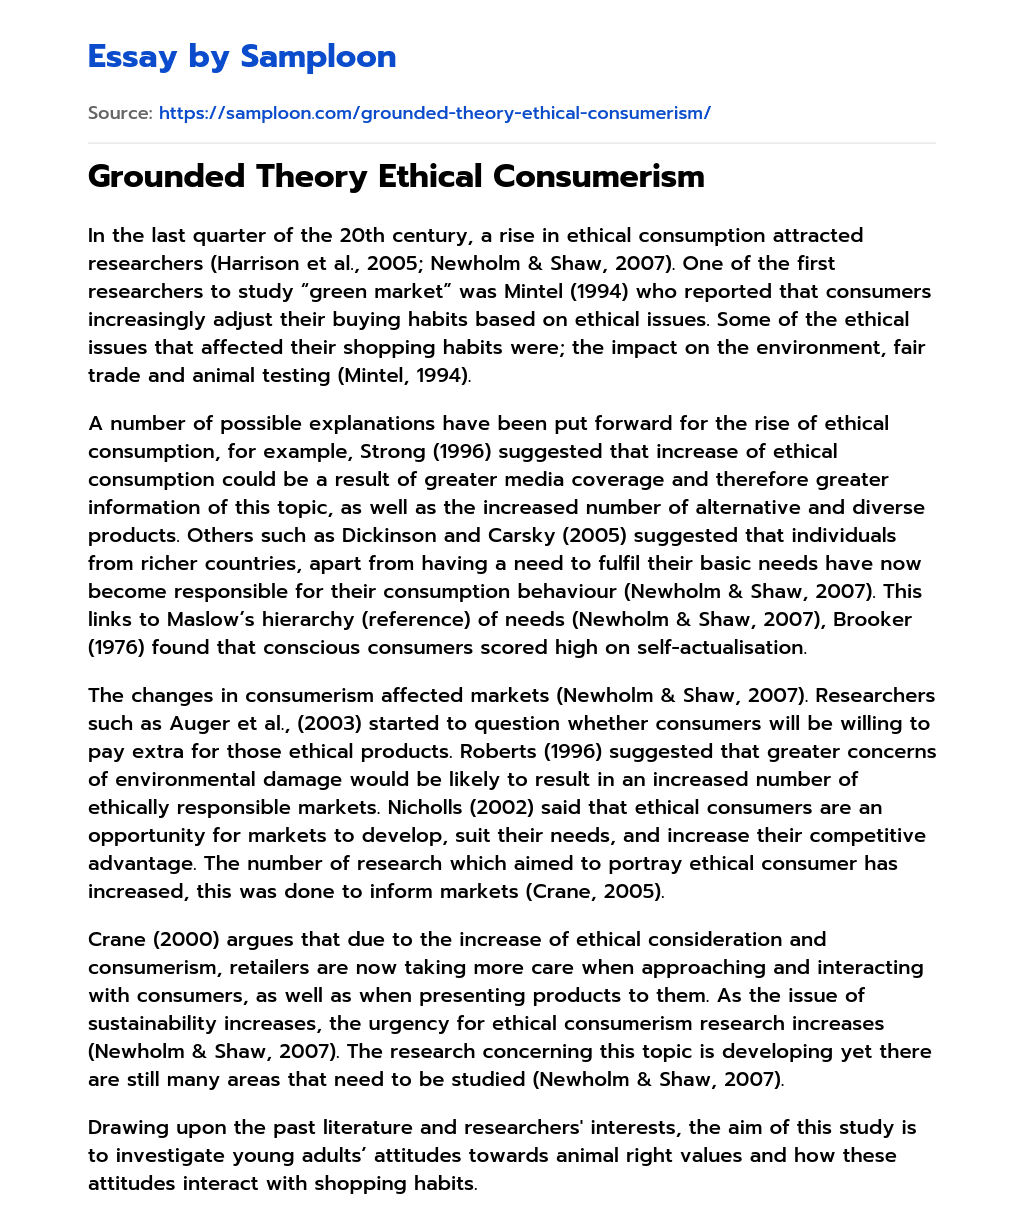 Grounded Theory Ethical Consumerism  essay